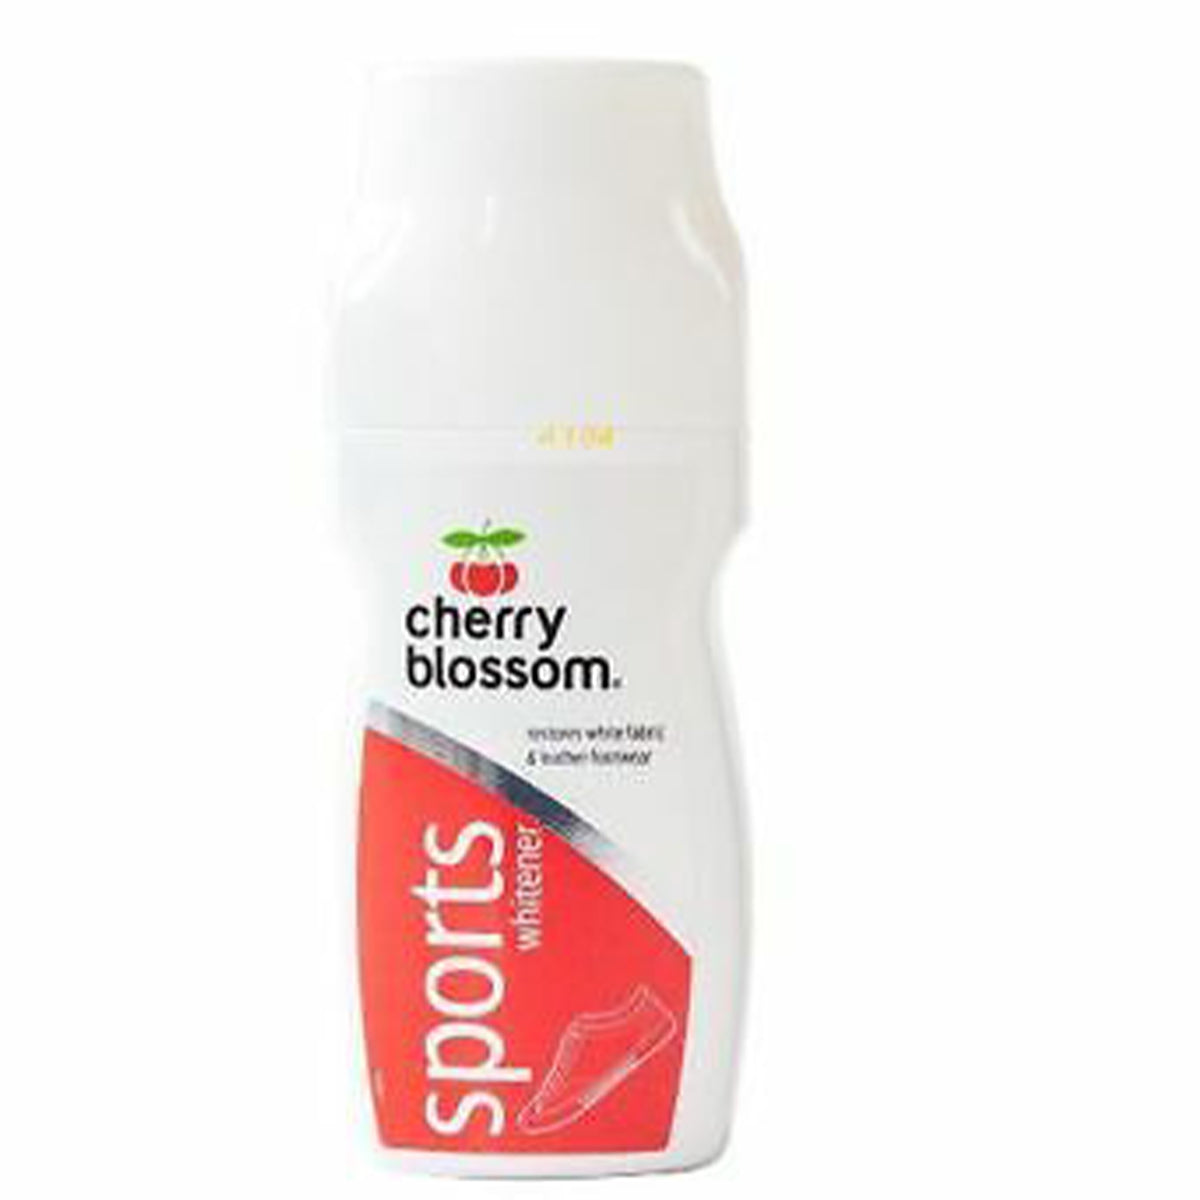 Cherry Blossom - Sports Whitener for Trainers - 85ml - Continental Food Store